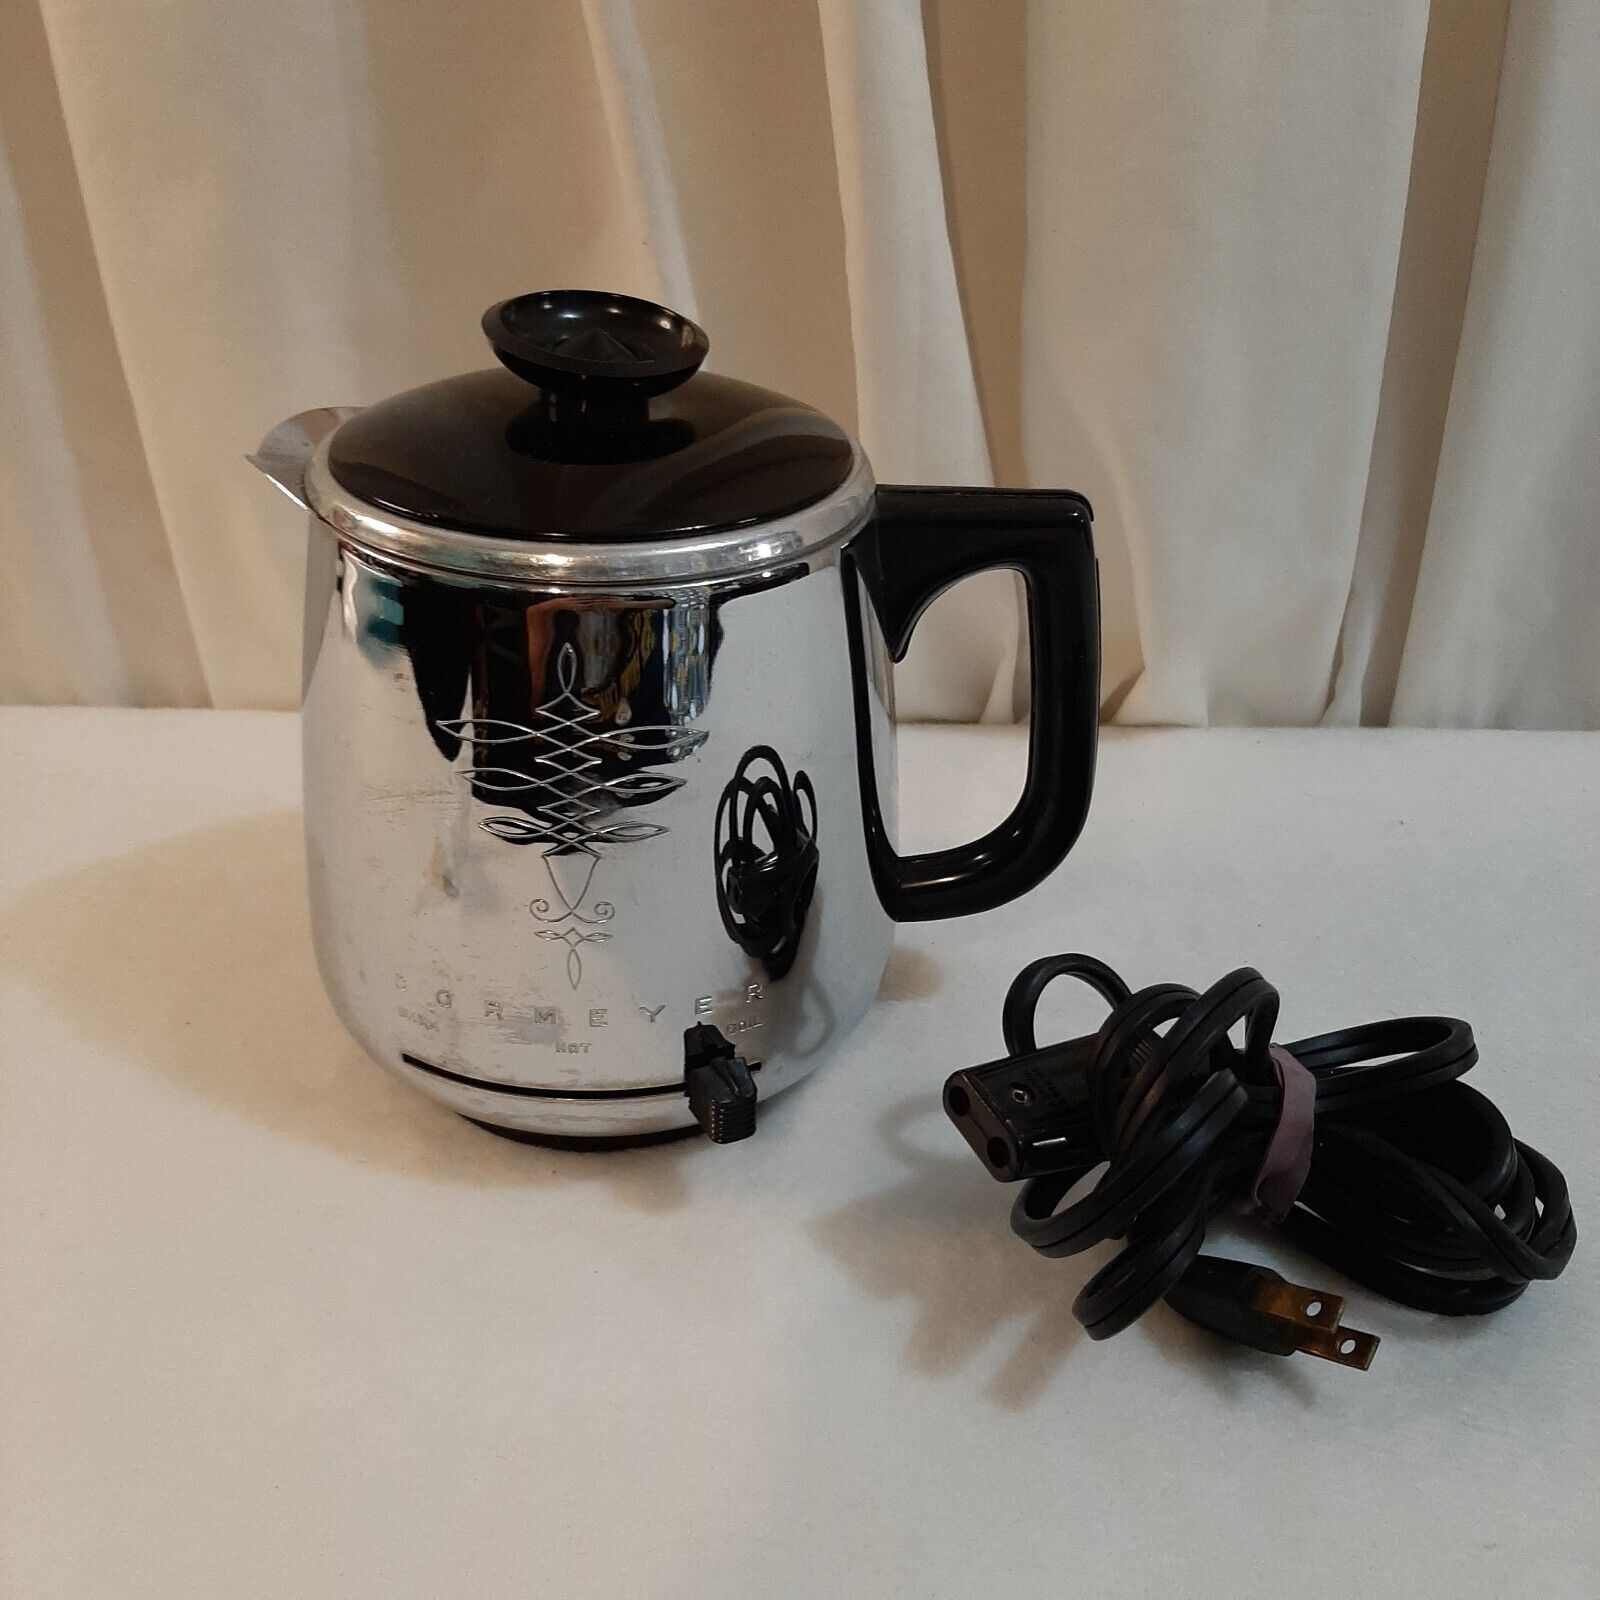 VTG Dormeyer Automatic Electri-Hurri-Hot-Cup Water Warmer Model 6700 *FOR PARTS*